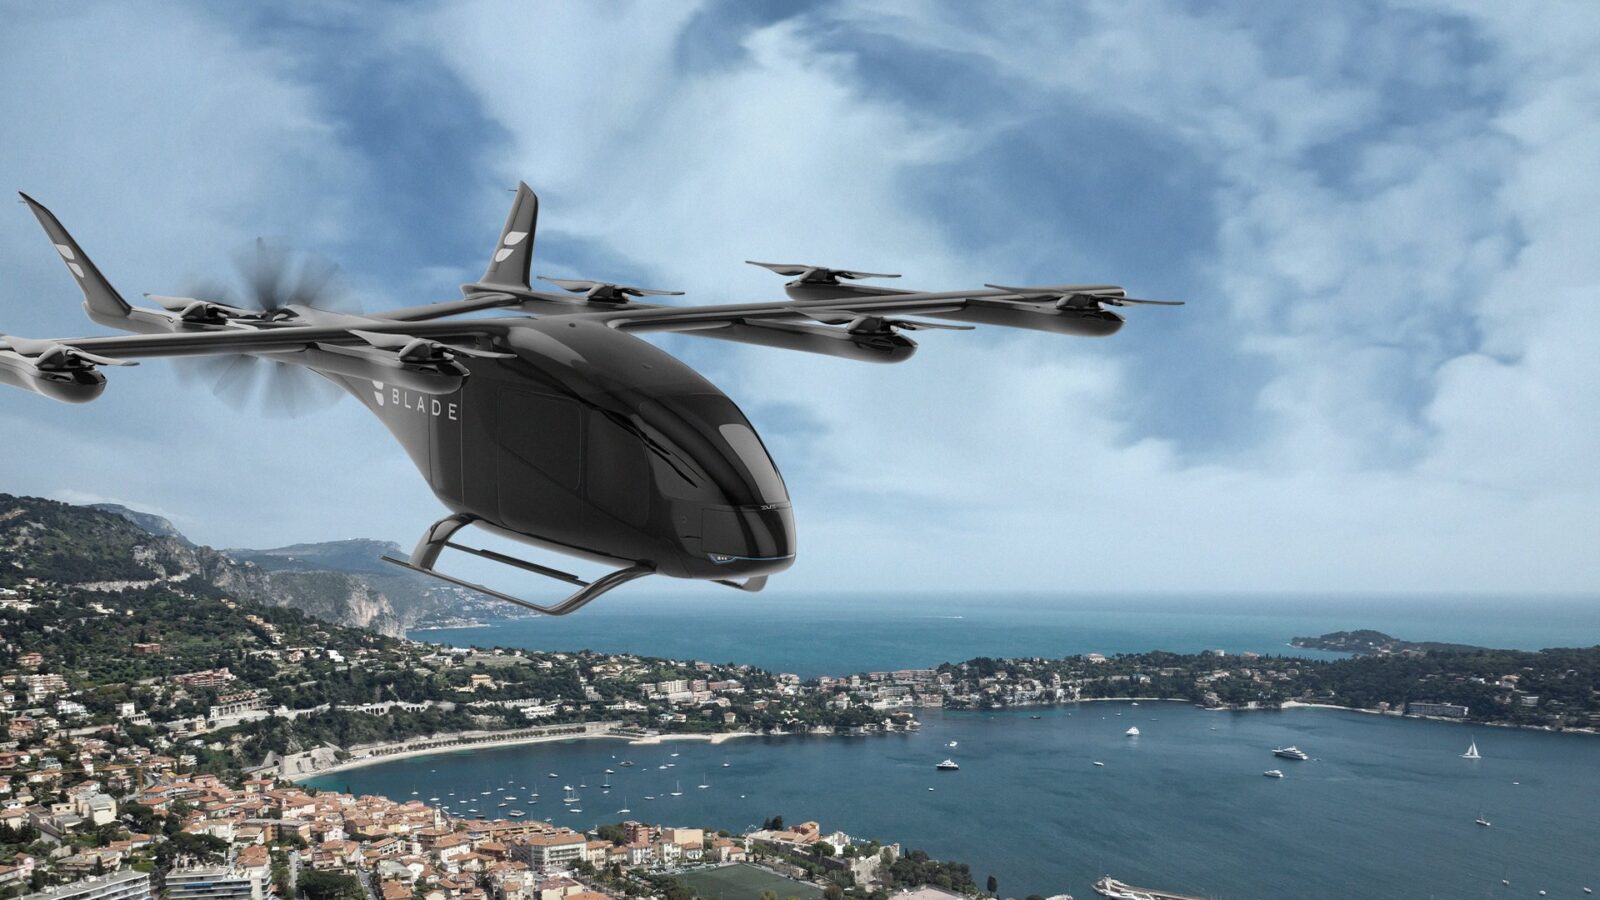 Eve and Blade Expand Partnership to Accelerate Electric Air Mobility in Europe